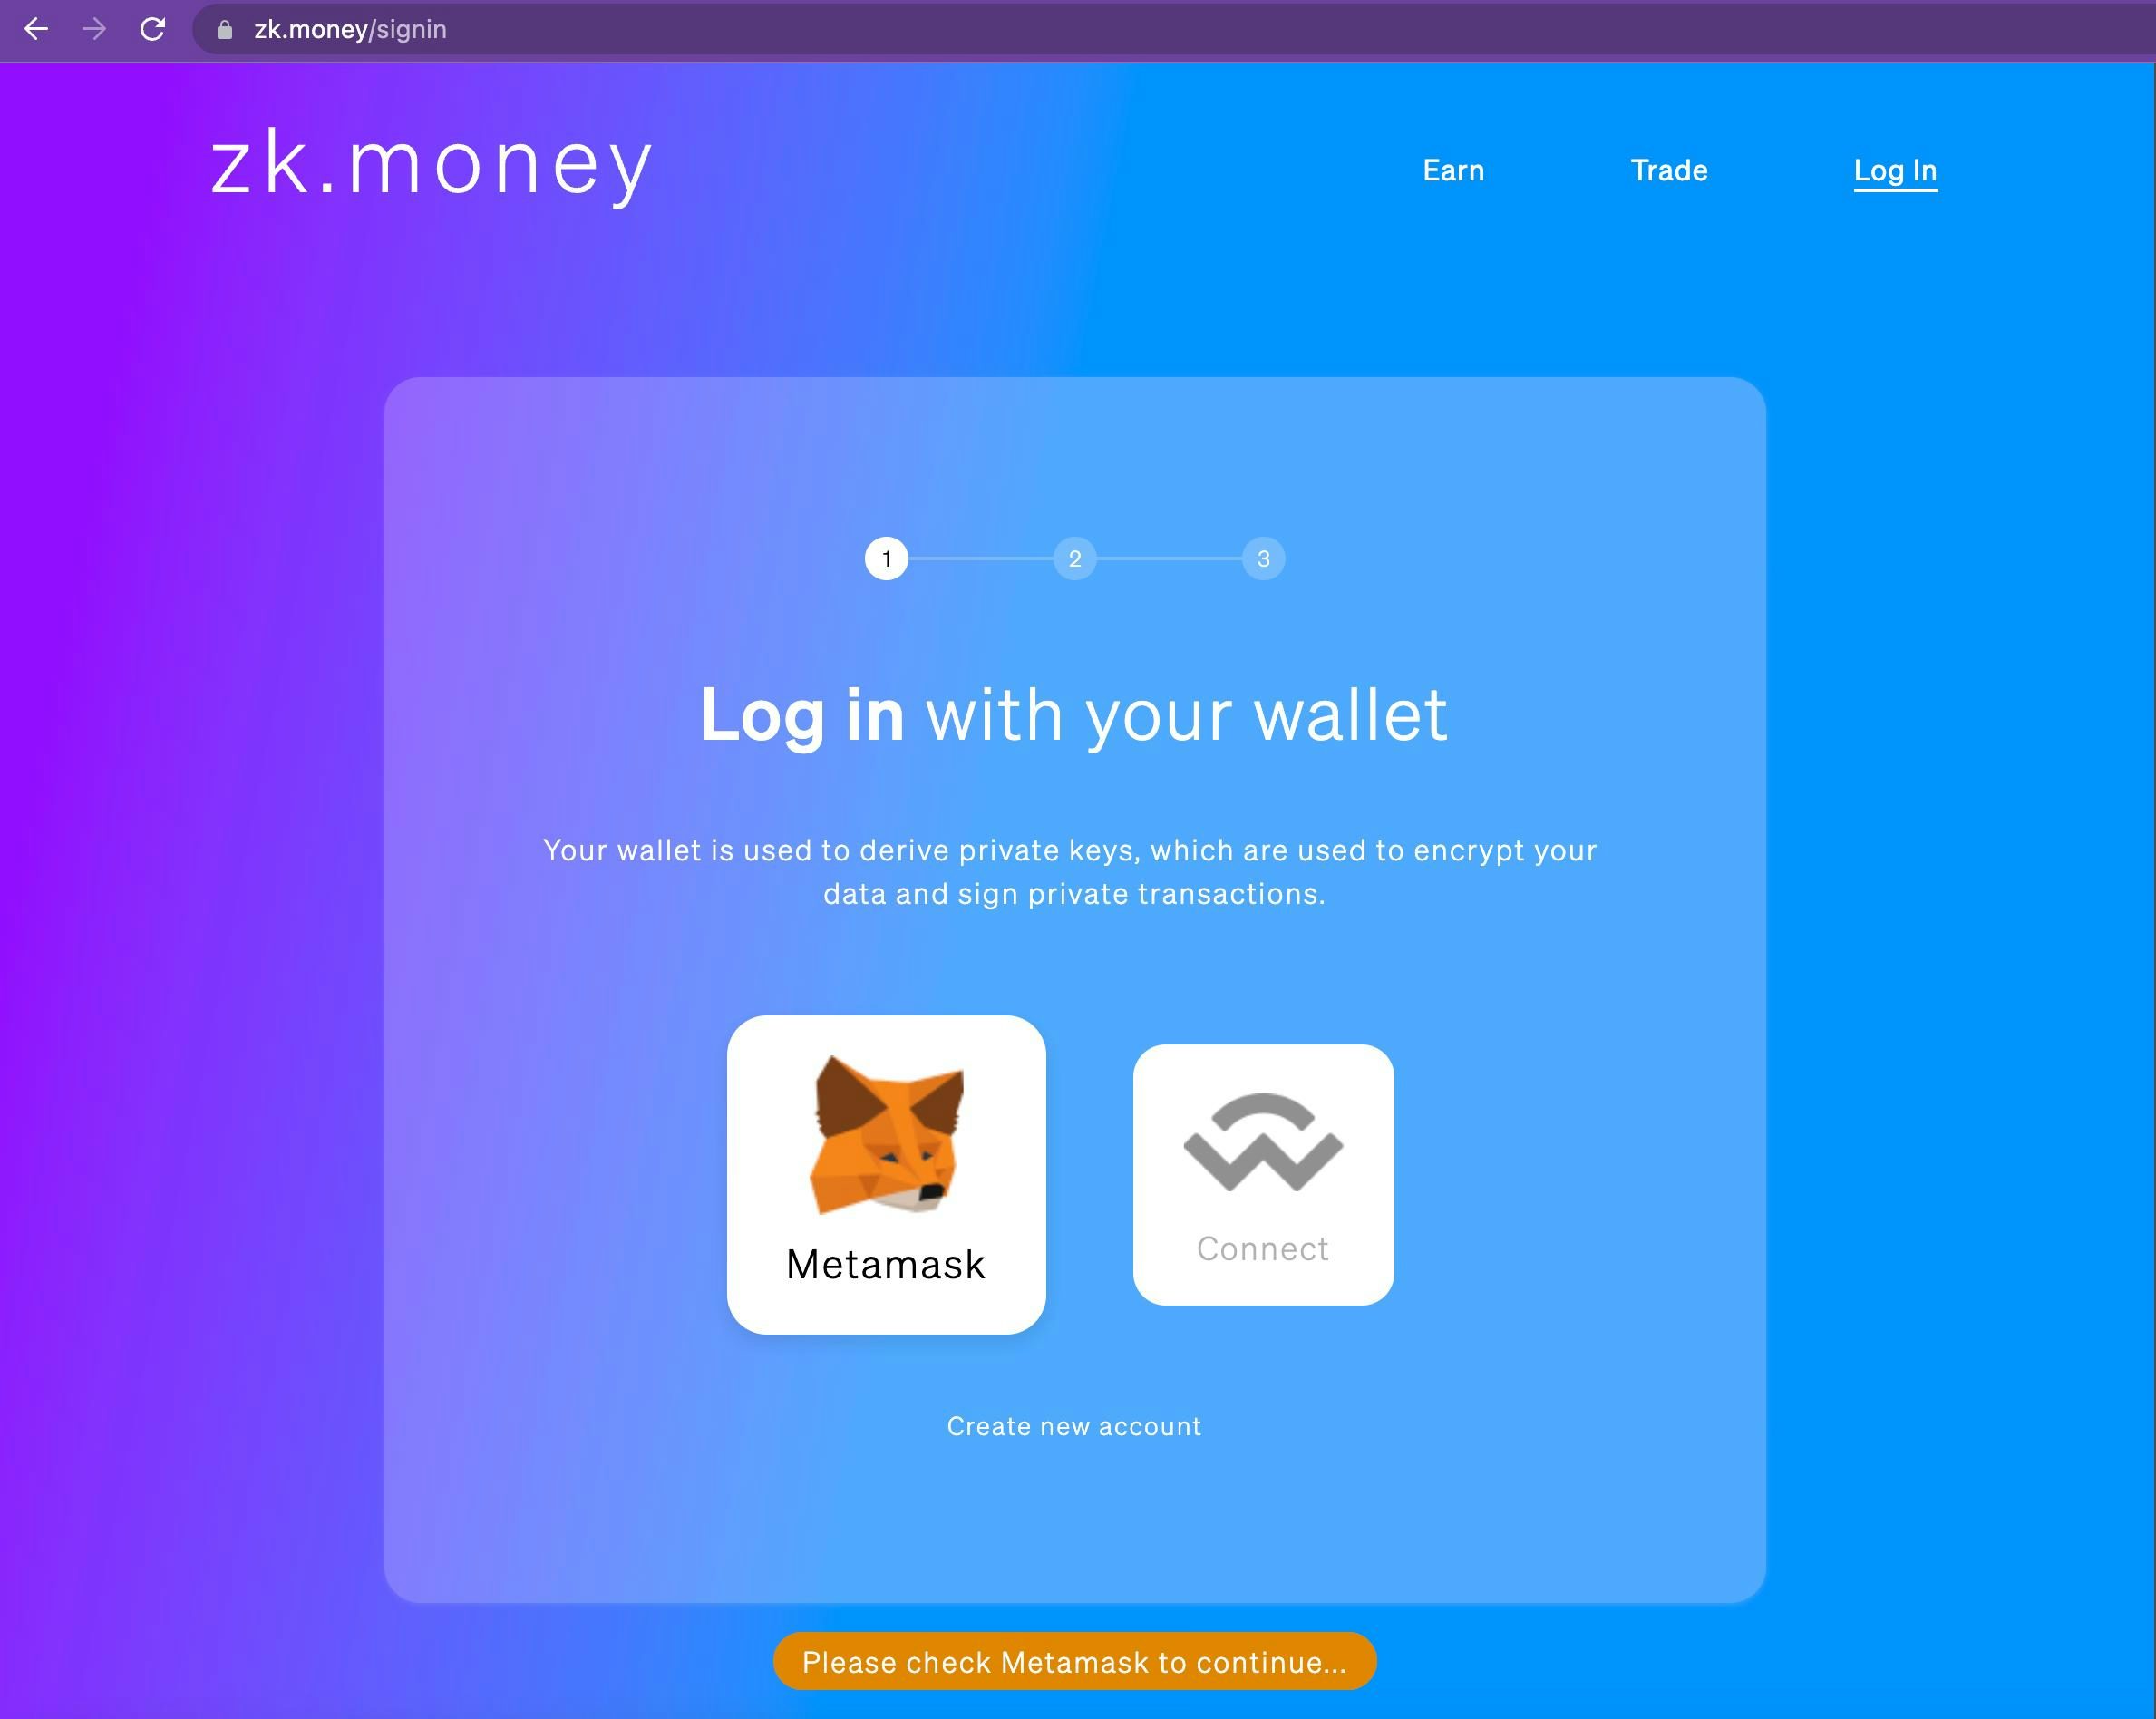 Connect your wallet. If you don’t have a zk.money account, the UI will prompt you to create one.